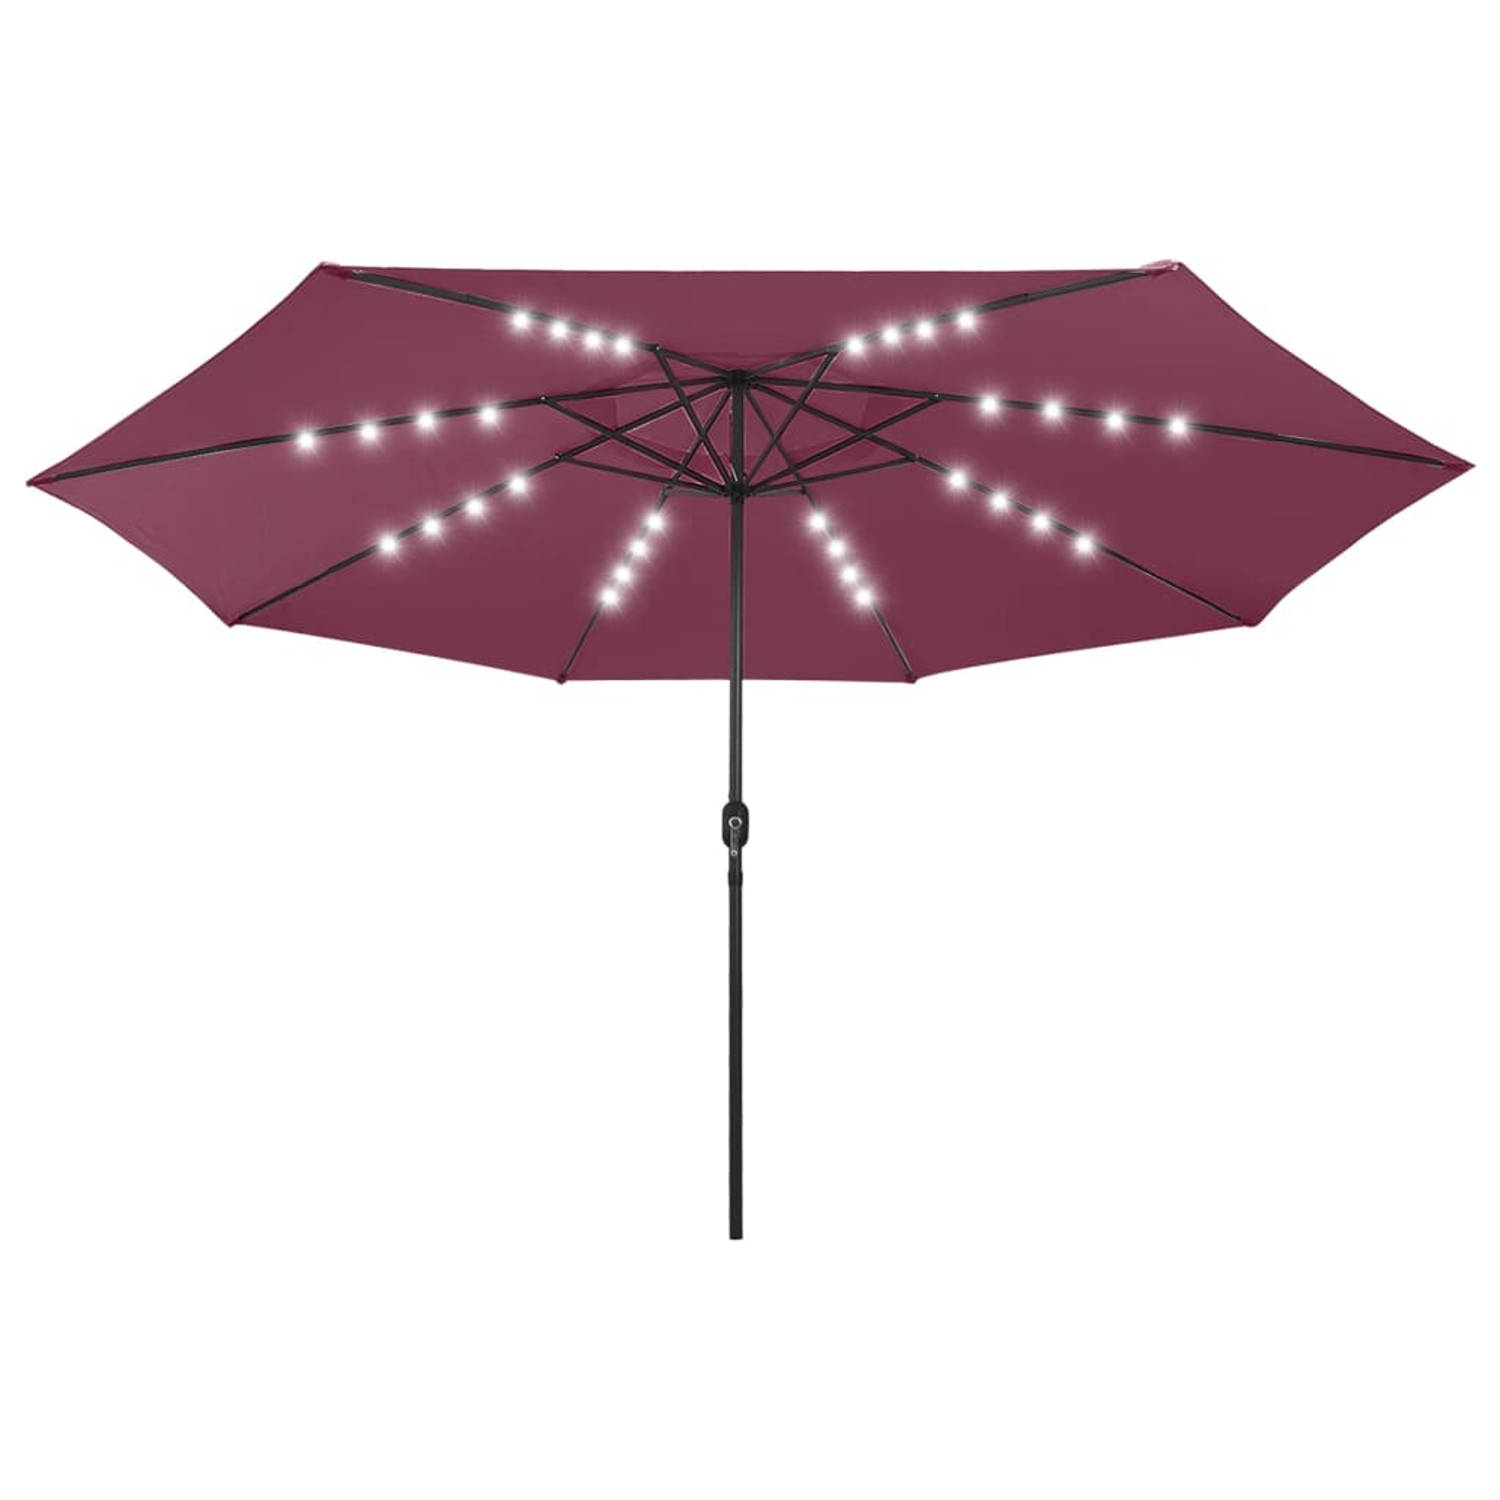 The Living Store Tuinparasol Bordeauxrood 400 x 267 cm LED-verlichting